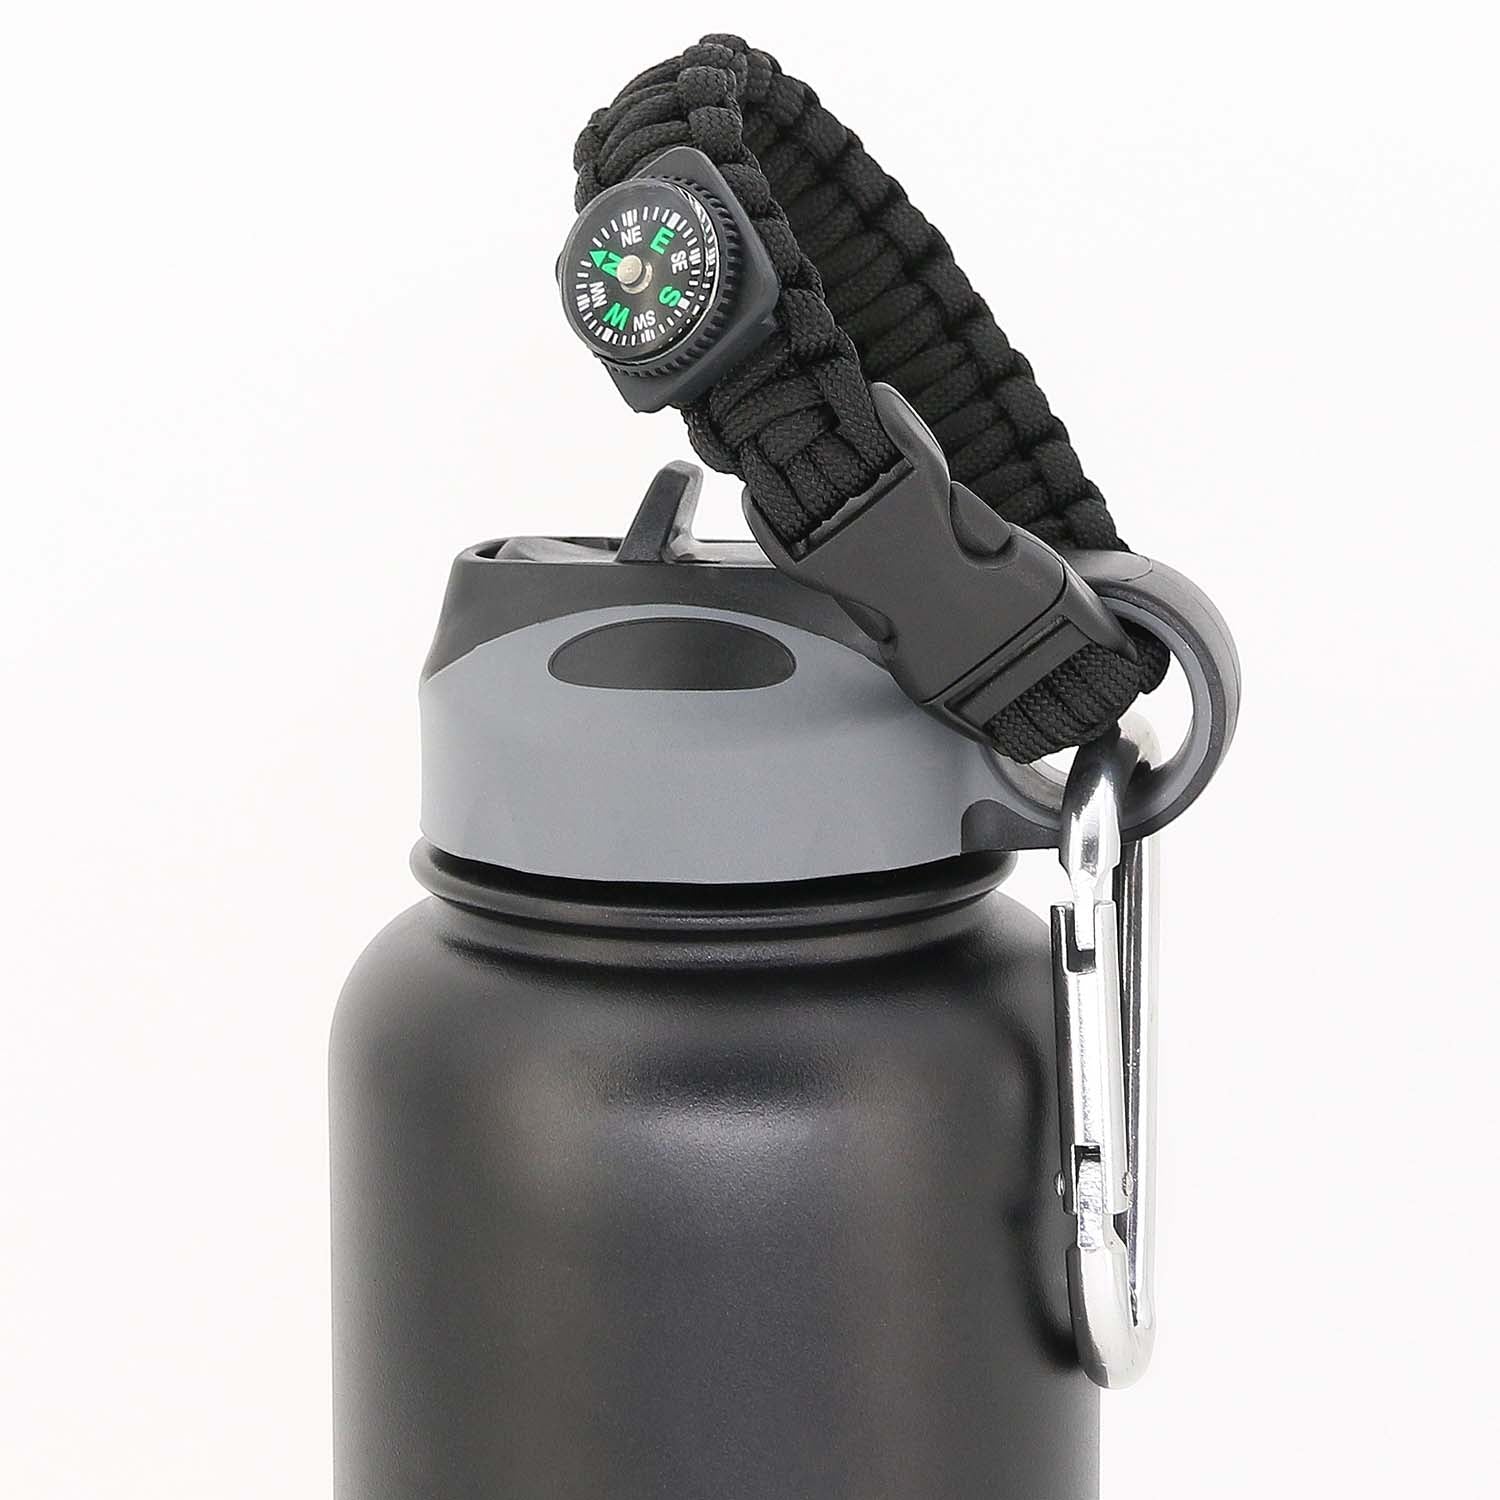 Paracord Handle for Insulated Bottle